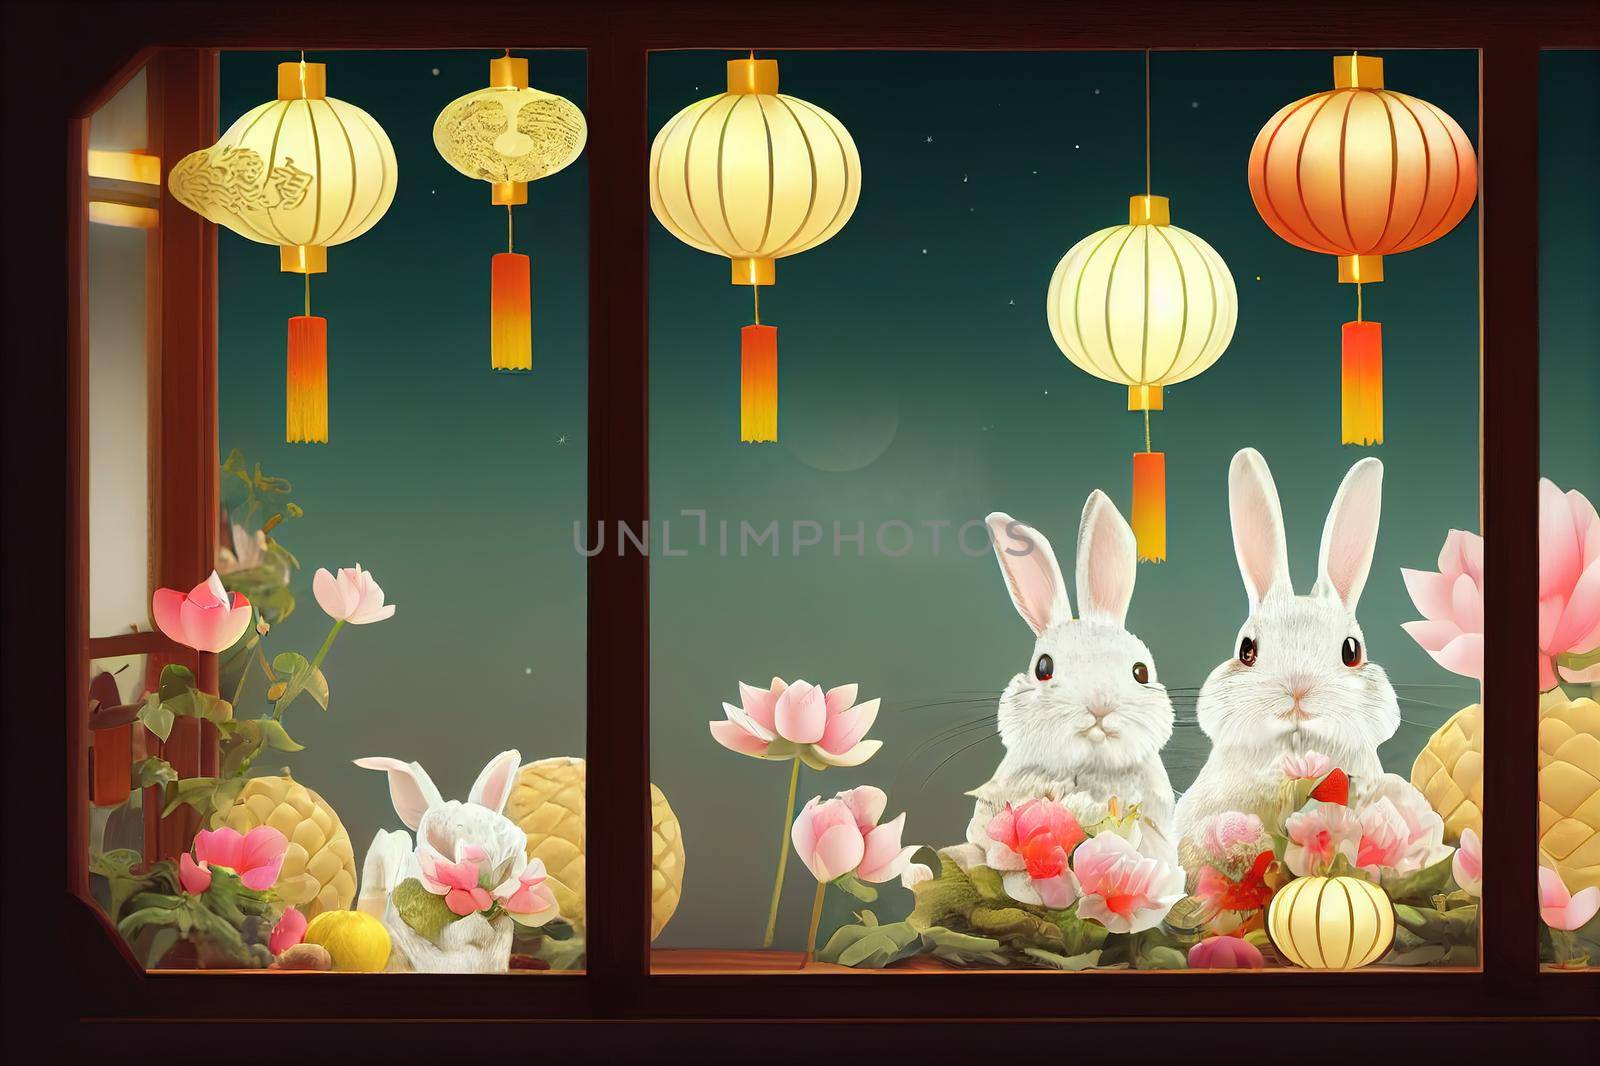 3D Illustration of cute rabbits on big mooncake stage watching full moon through Chinese window frame with pomelo, lotus and lanterns aside. Translation August fifteenth. Mid Autumn Festival